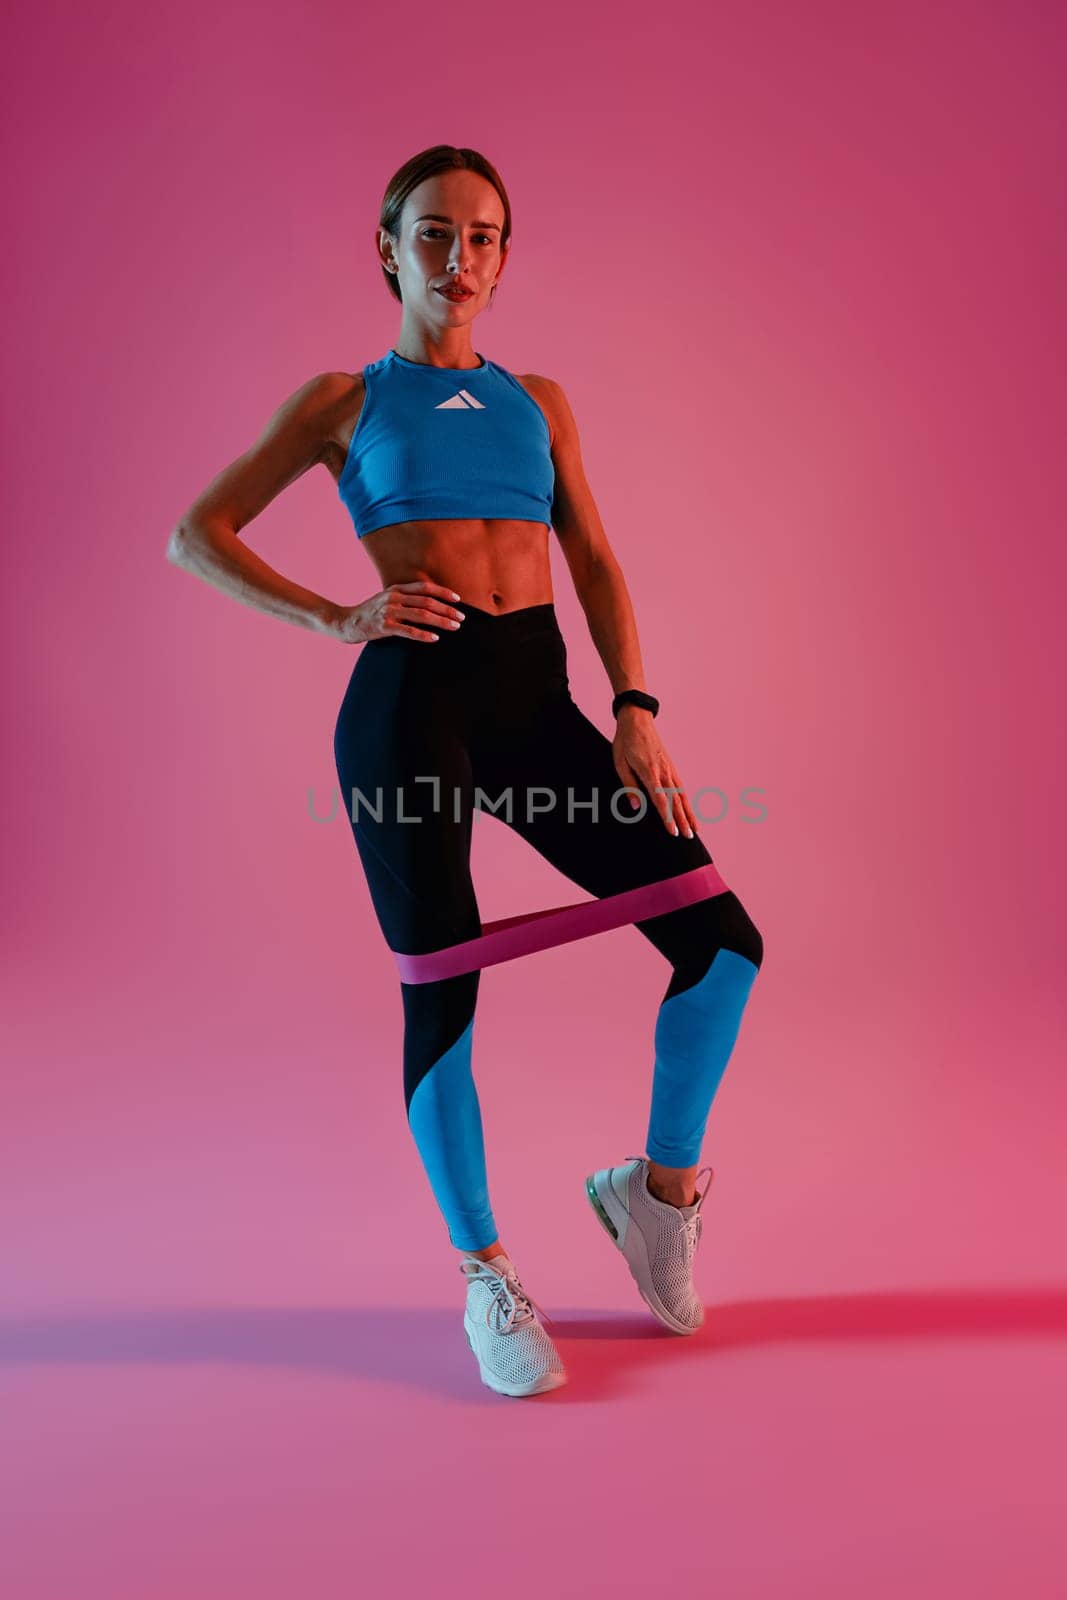 Athletic woman trains legs with fitness elastic band on studio background. High quality photo